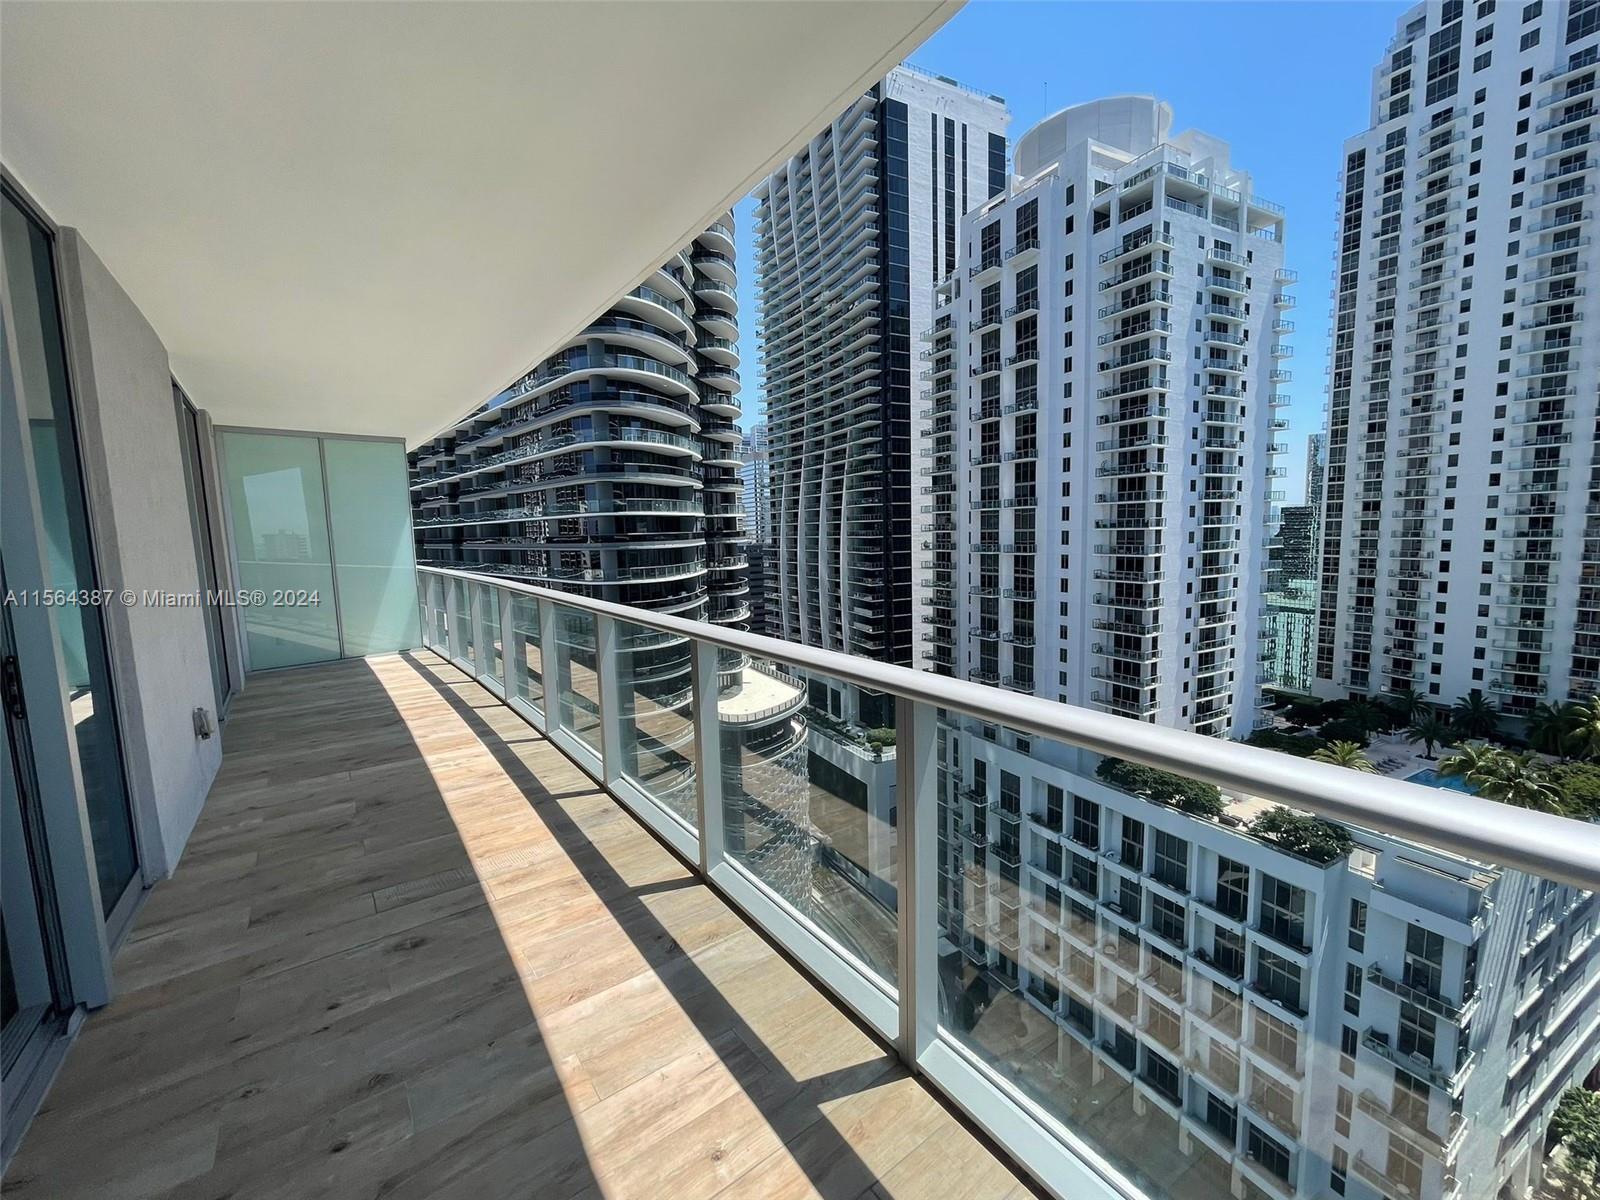 2 Bedrooms 2 bathrooms corner unit at Millecento! Wood flooring throughout the whole apartment!